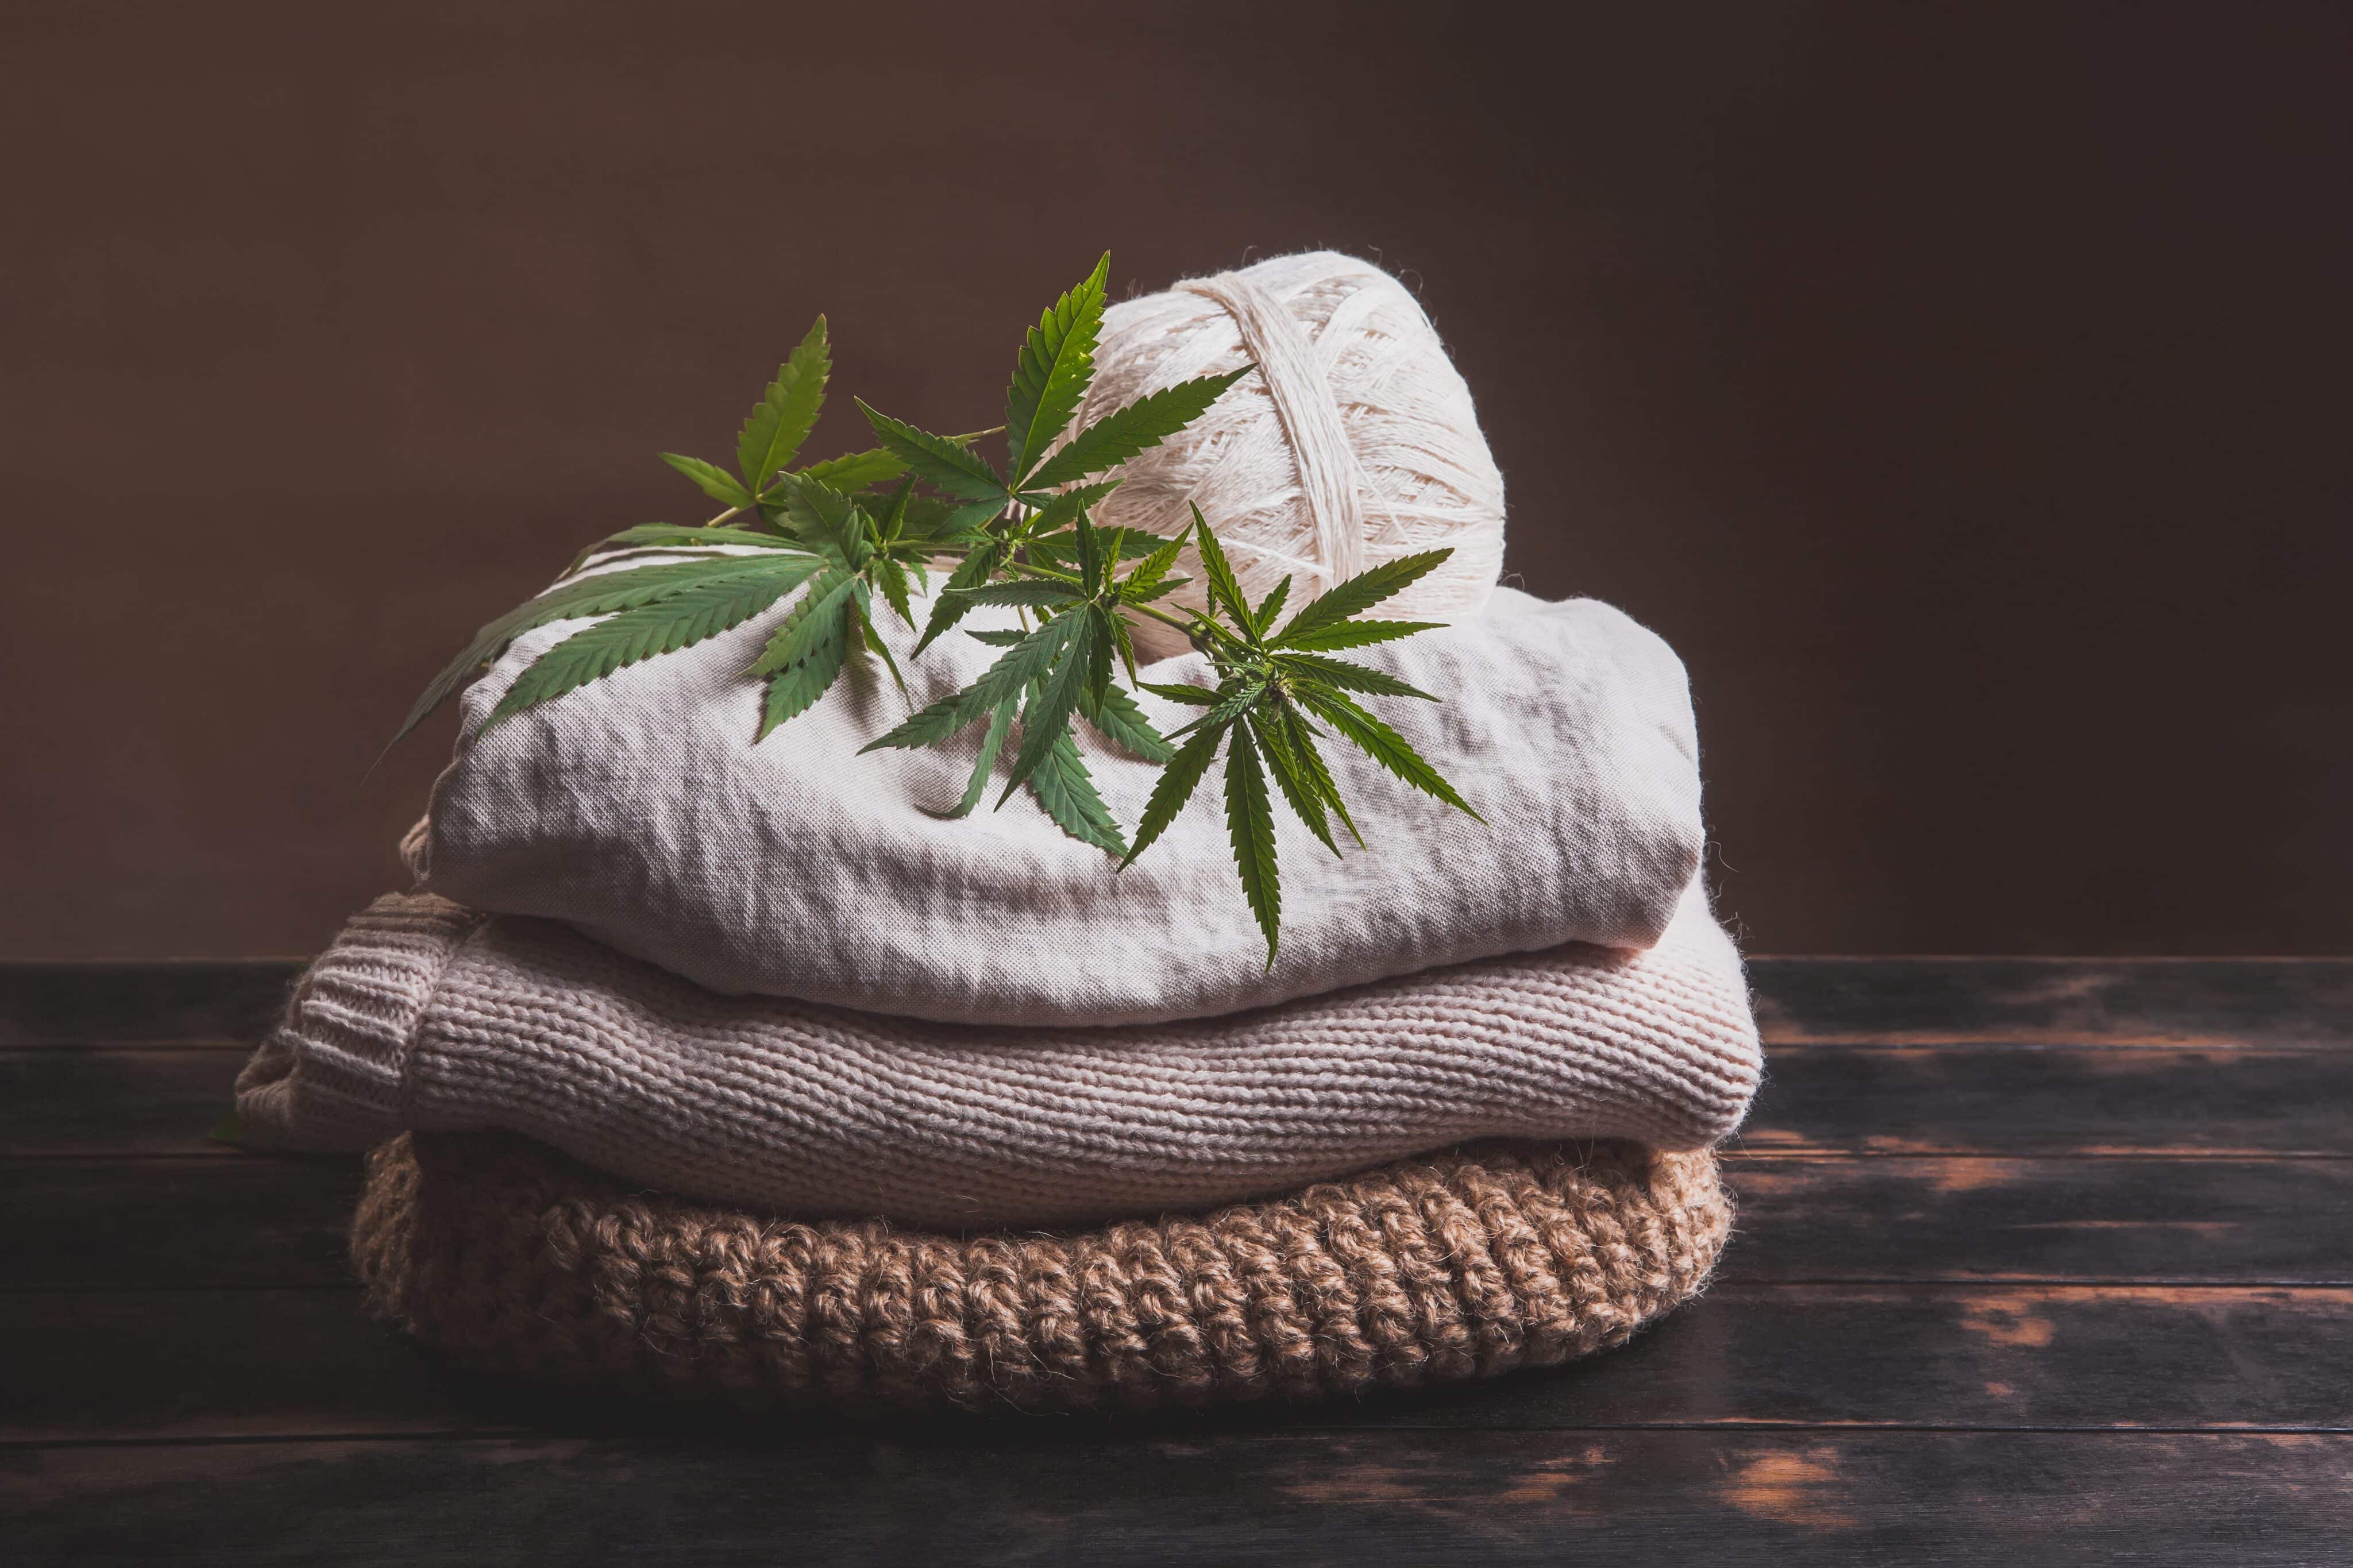 Comment on Hemp Clothing Market to Hit $23B by 2031, Report Predicts by Armando Ramos